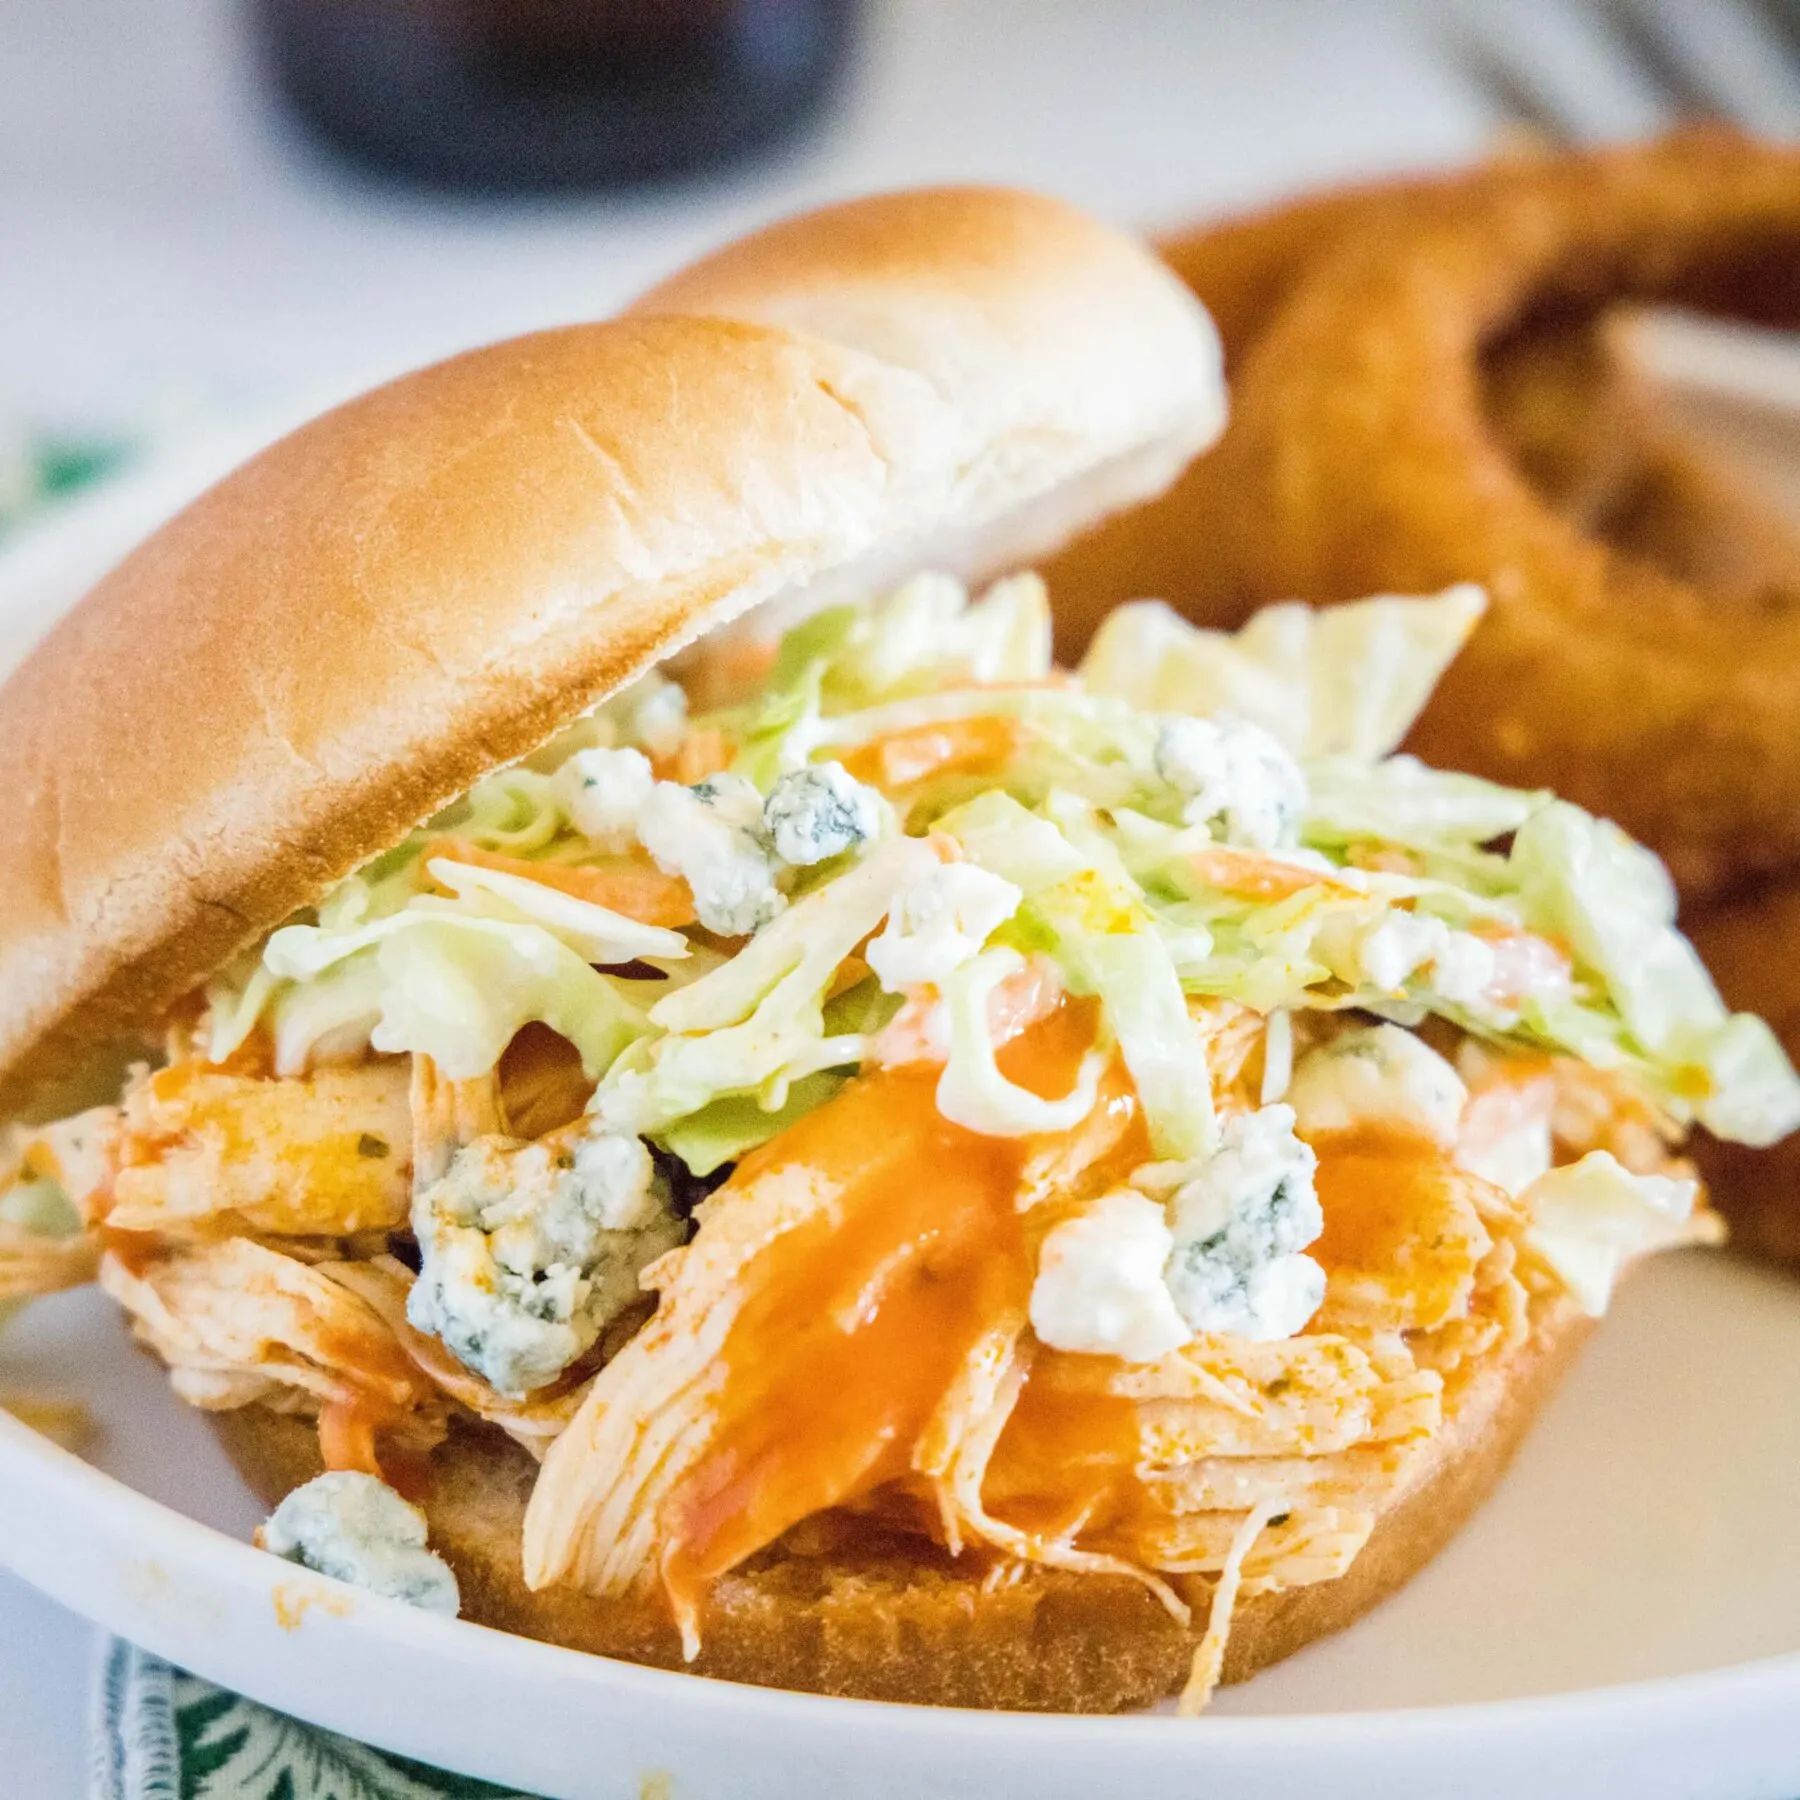 A buffalo chicken sandwich on a plate, topped with coleslaw and blue cheese, with onion rings in the background